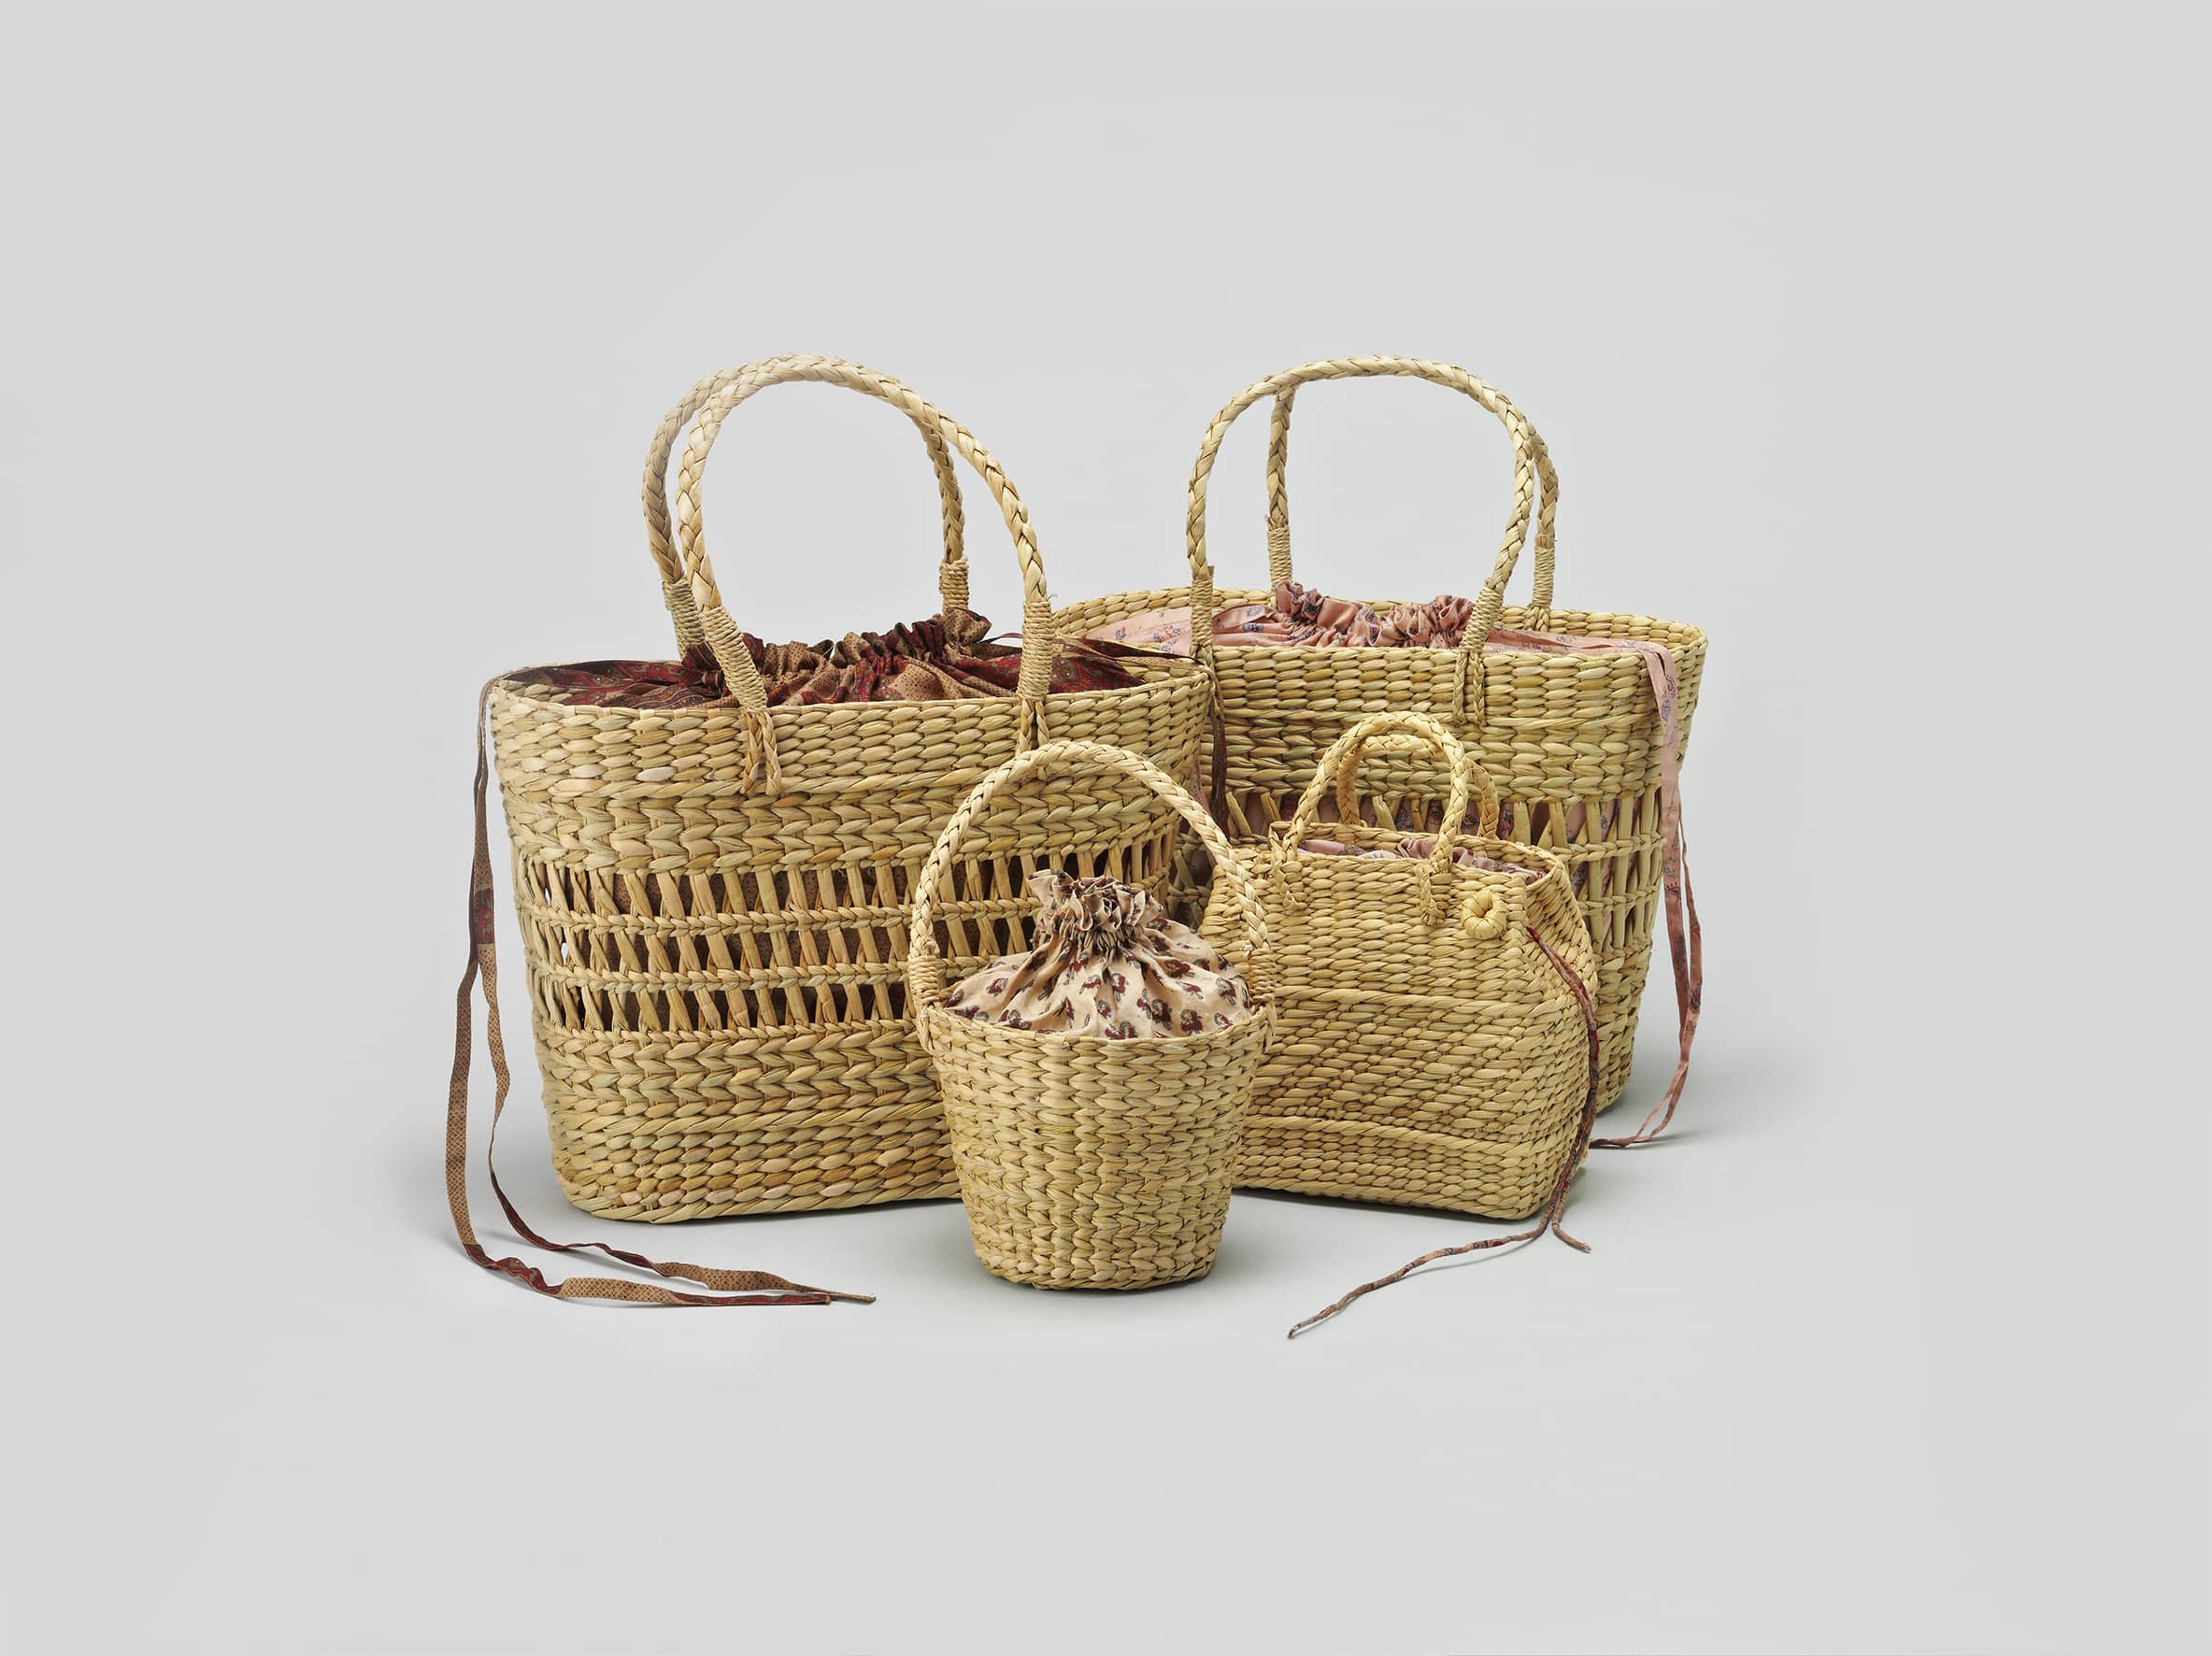 Straw bags